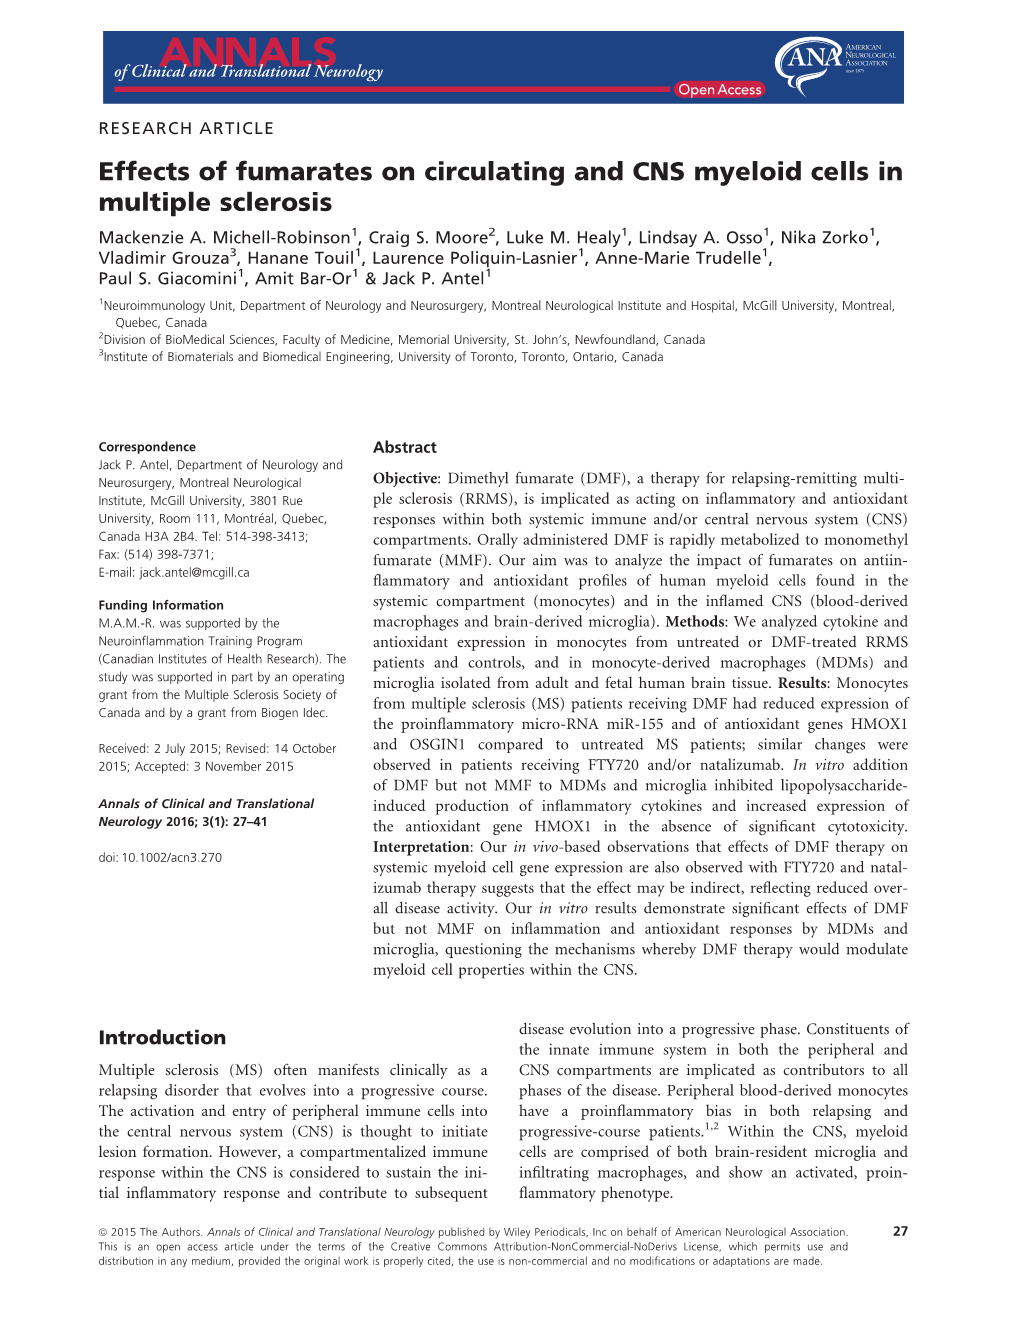 Effects of Fumarates on Circulating and CNS Myeloid Cells in Multiple Sclerosis Mackenzie A